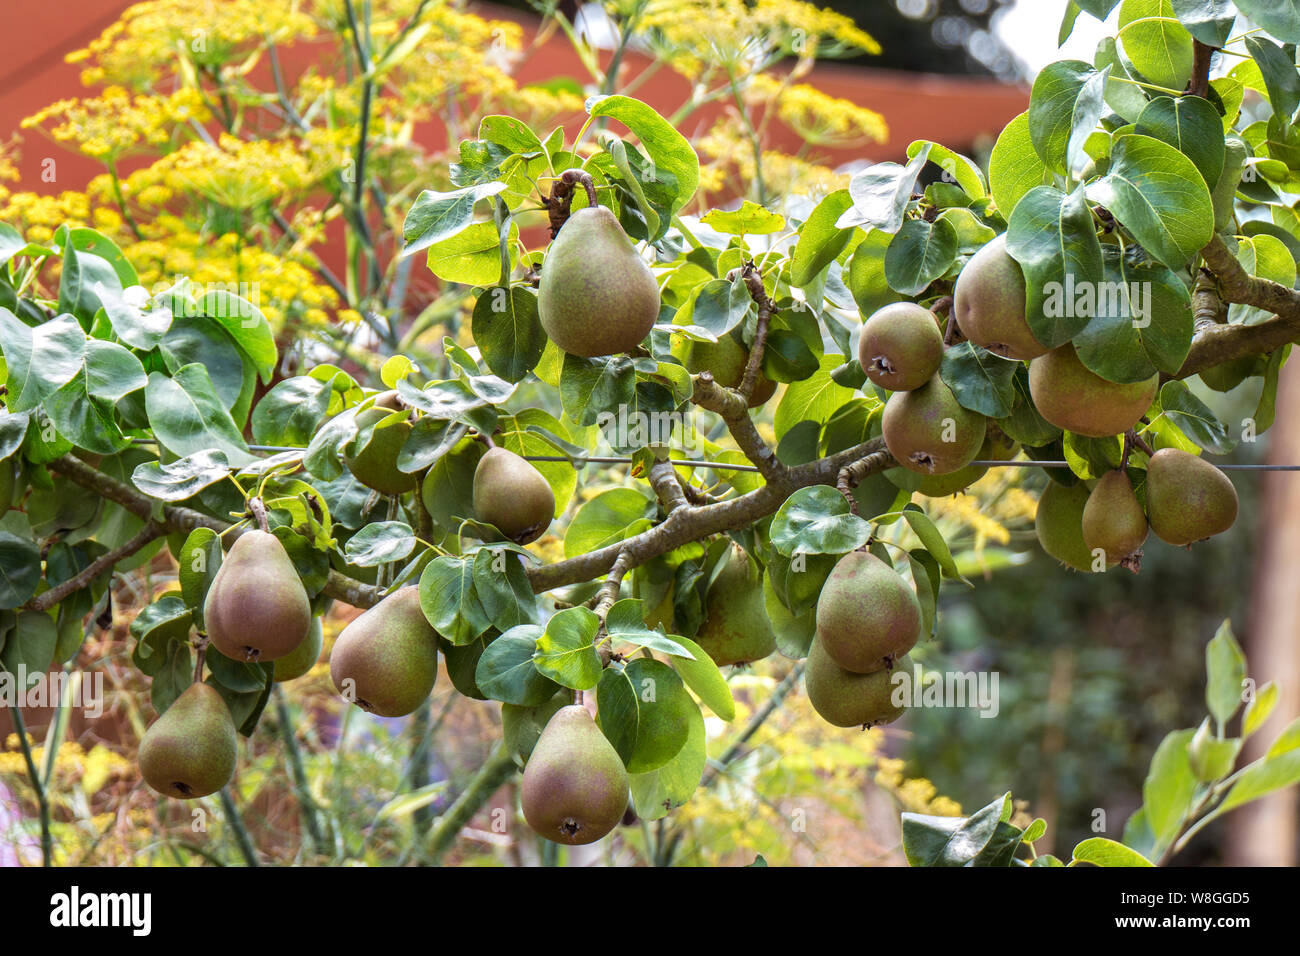 ESPALIER ESPALIERED Pear Fruit Tree 'Beurre Hardy' (Pyrus communis 'Beurre Hardy') espalier trained ripening in a summer kitchen garden with garden parasol behind Stock Photo